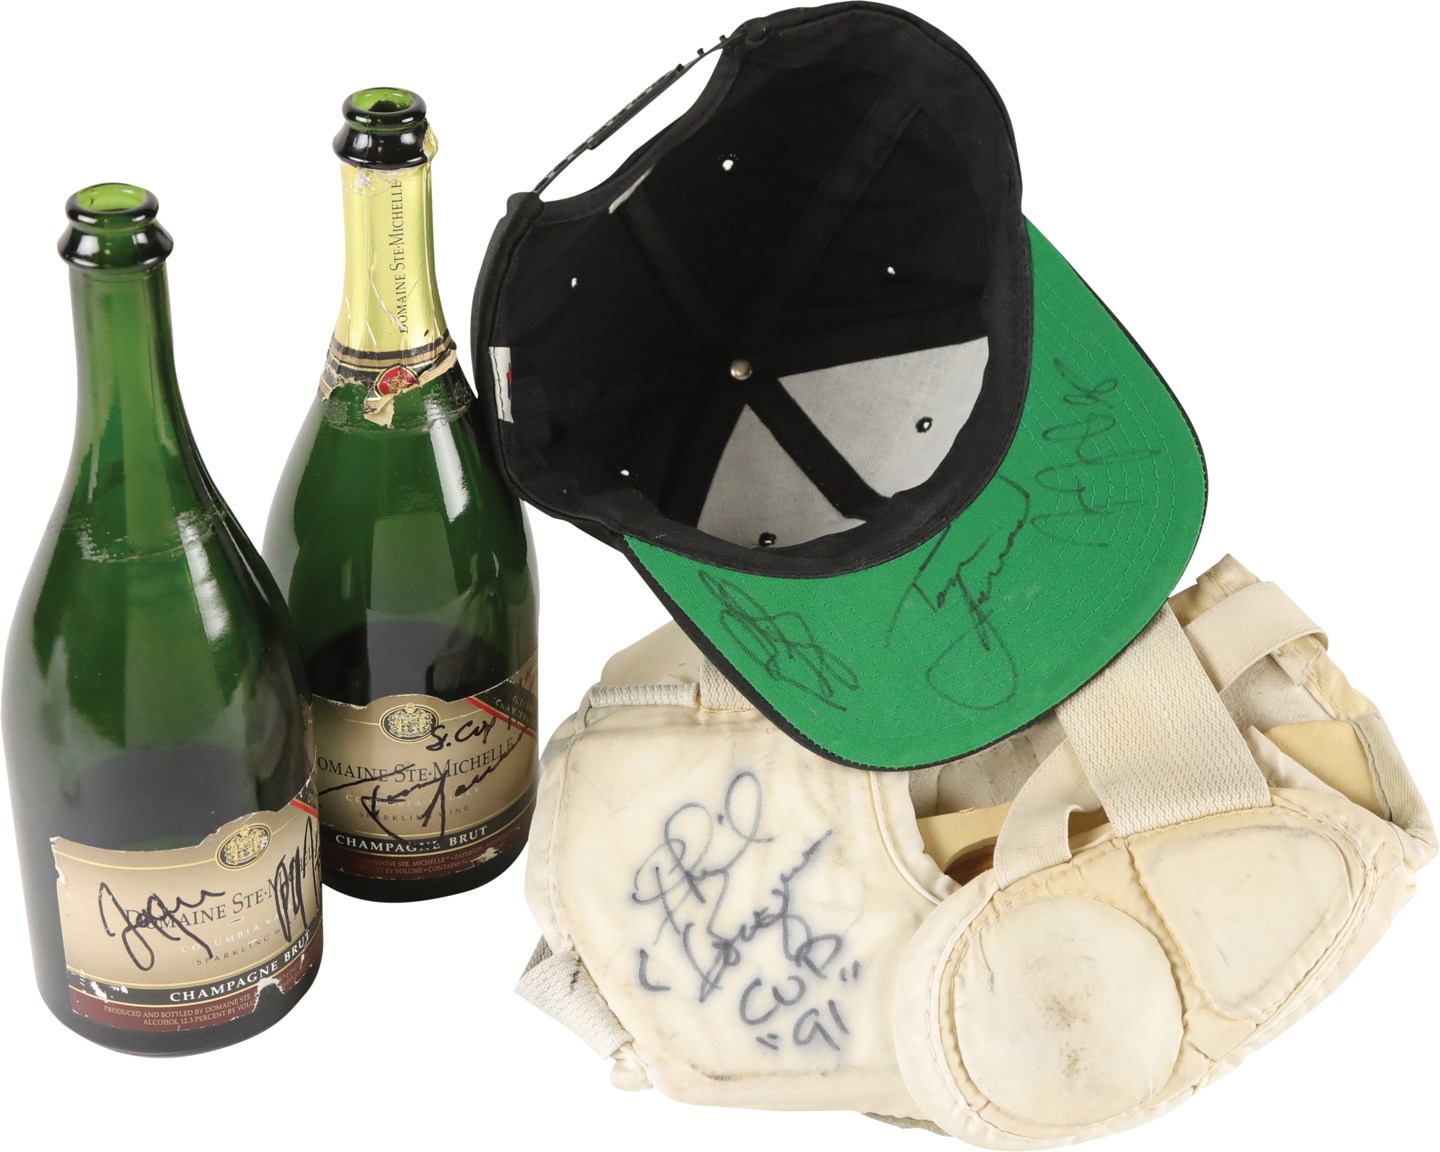 1991 Pittsburgh Penguins Stanley Cup Championship Champagne Bottle, Hat, and More